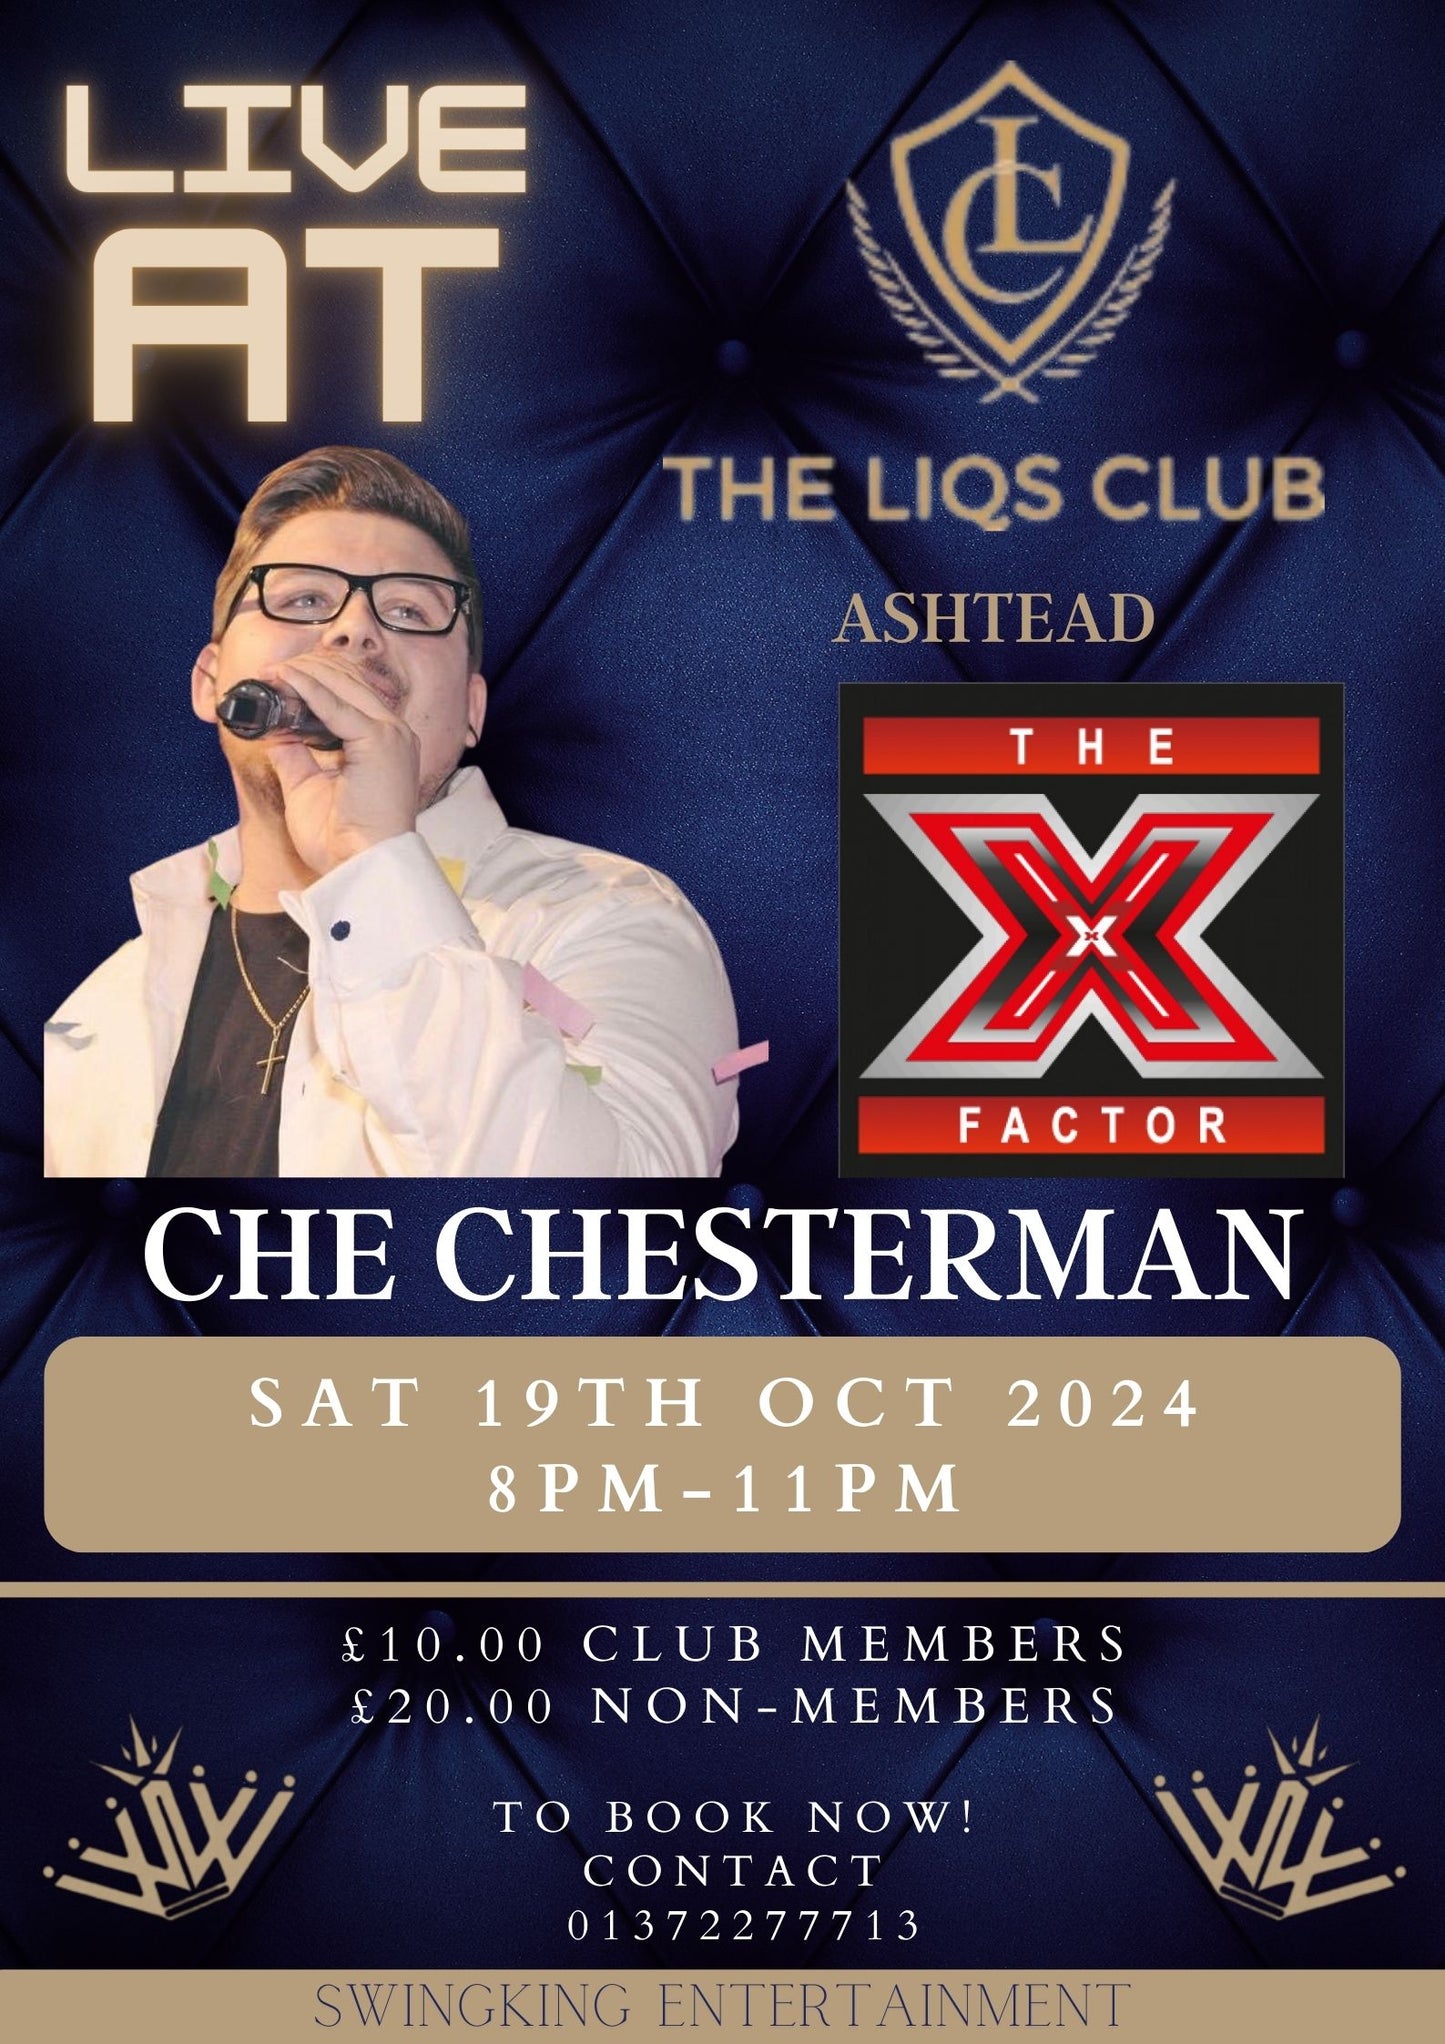 Live music with Che Chesterman - 8pm Saturday 19th October 2024